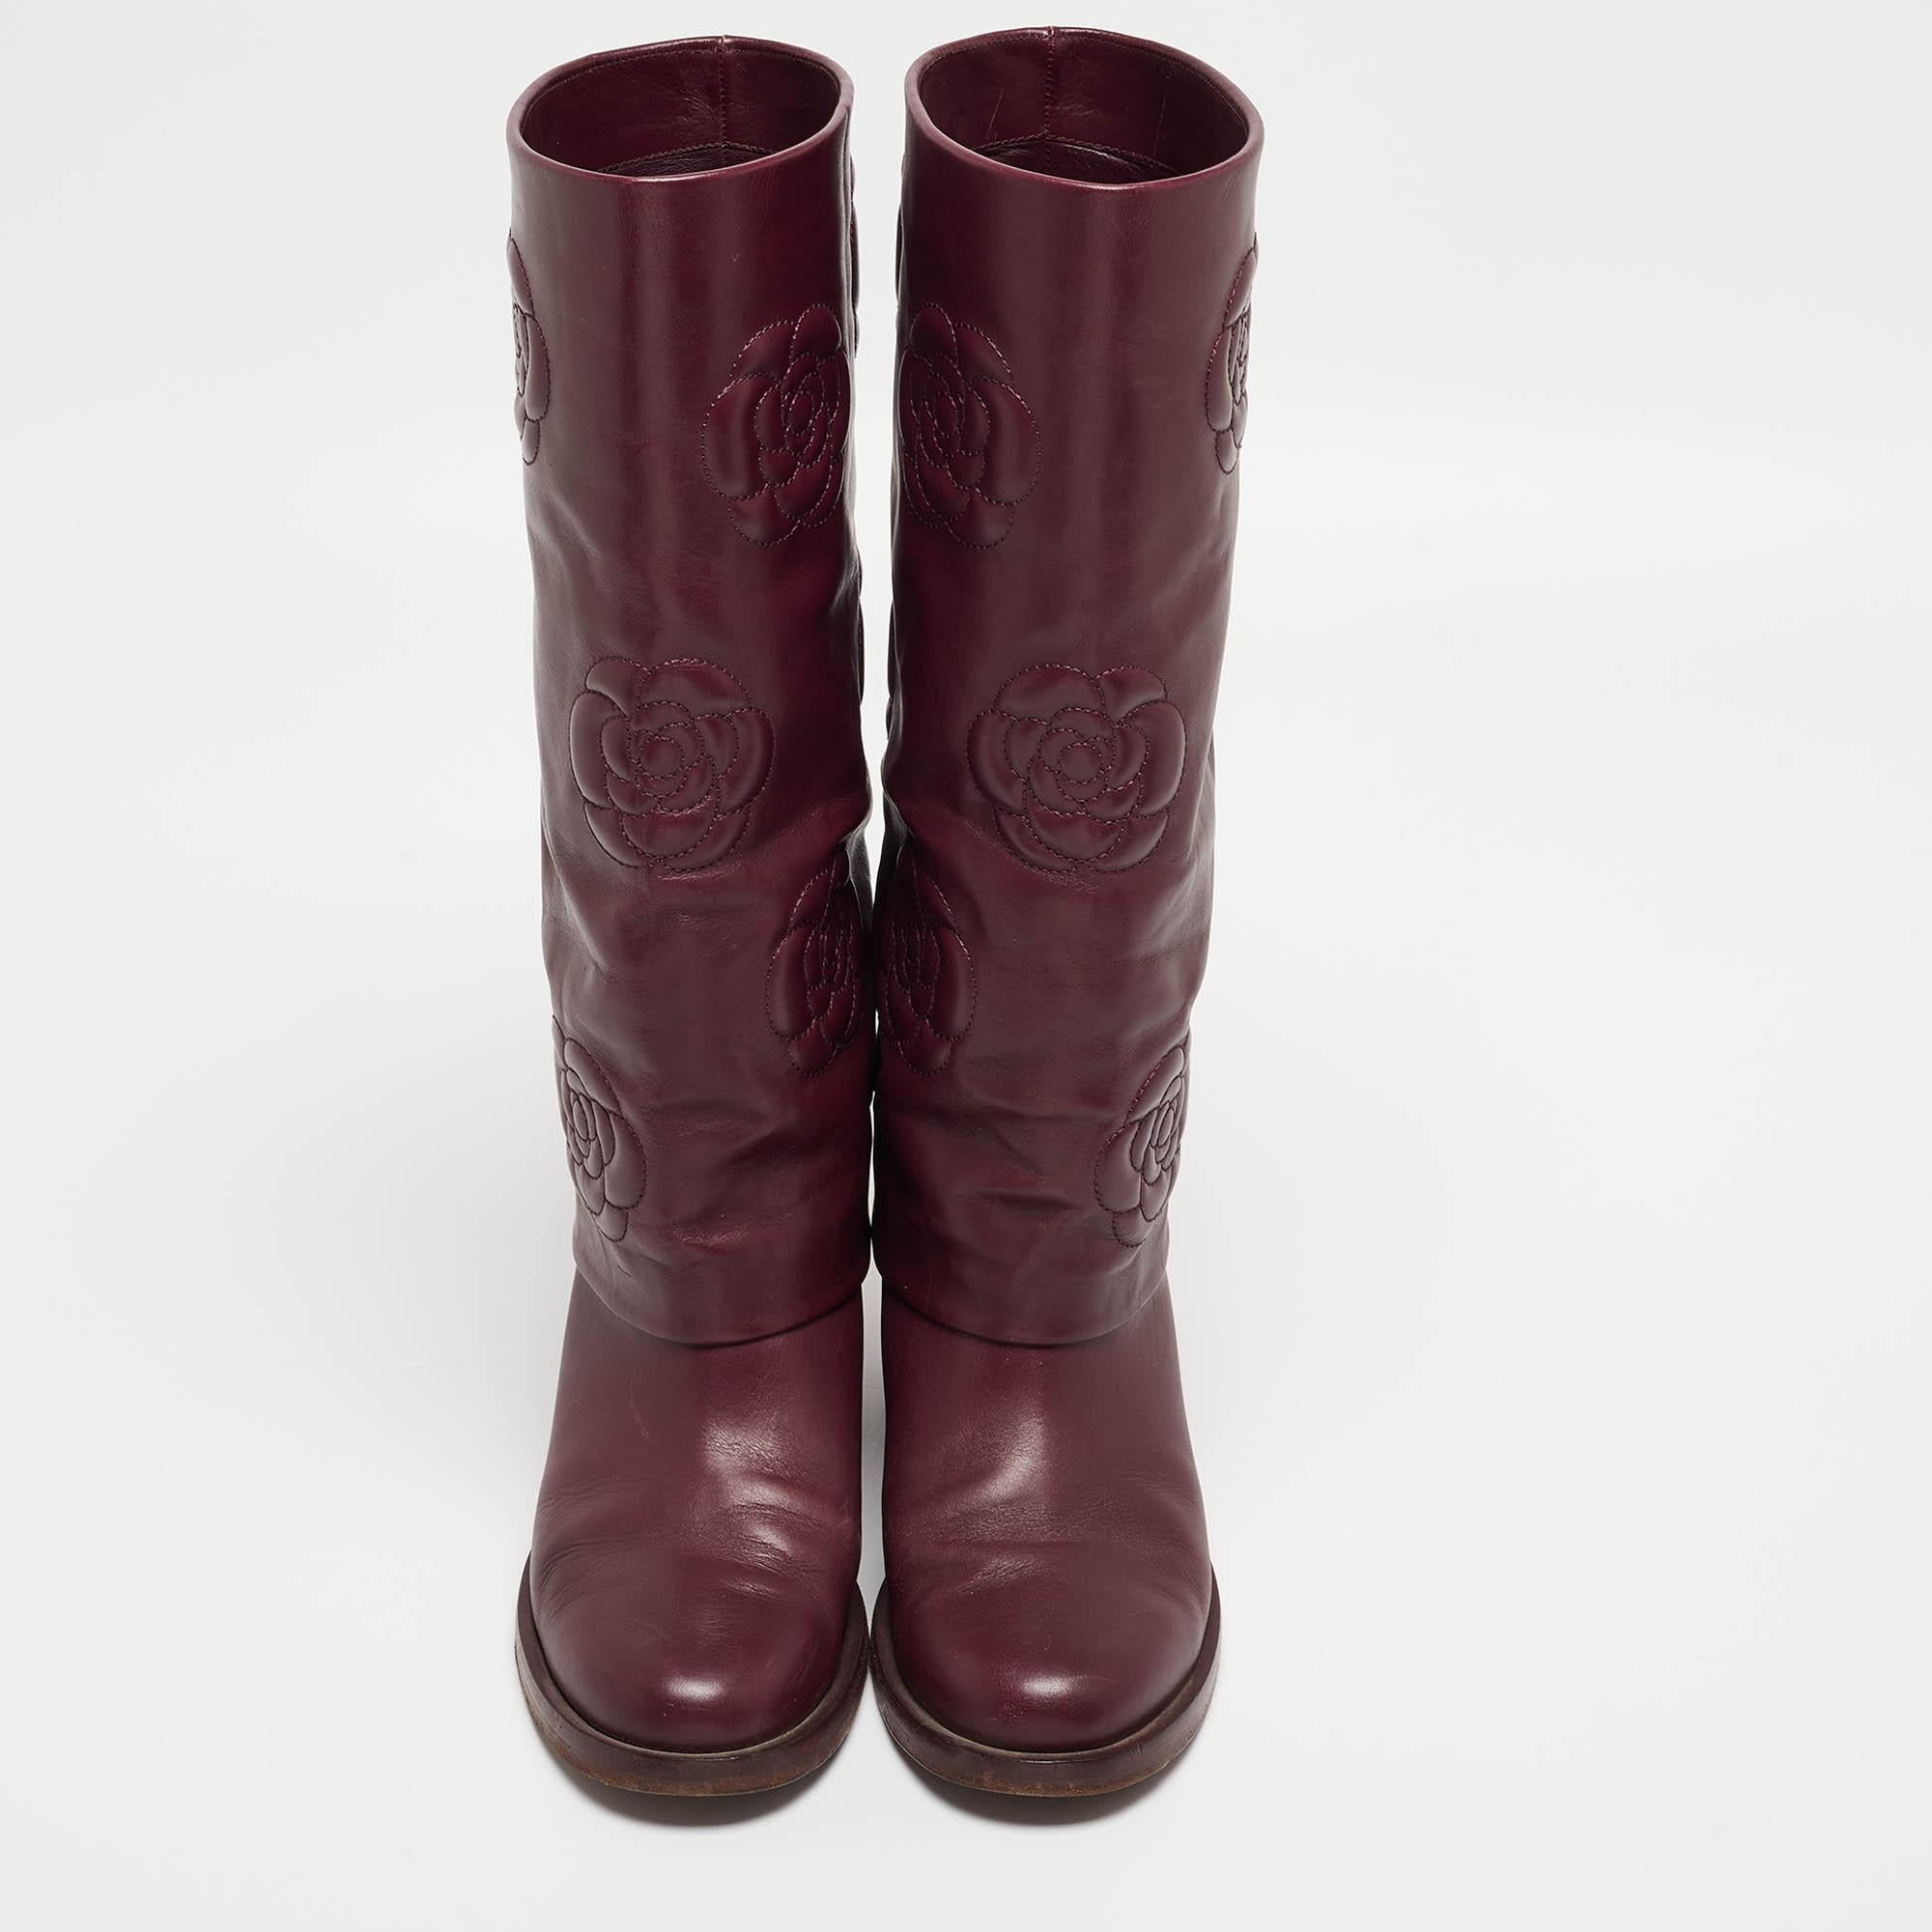 Chanel Purple Leather Knee Length Boots Size 39.5 In Good Condition For Sale In Dubai, Al Qouz 2